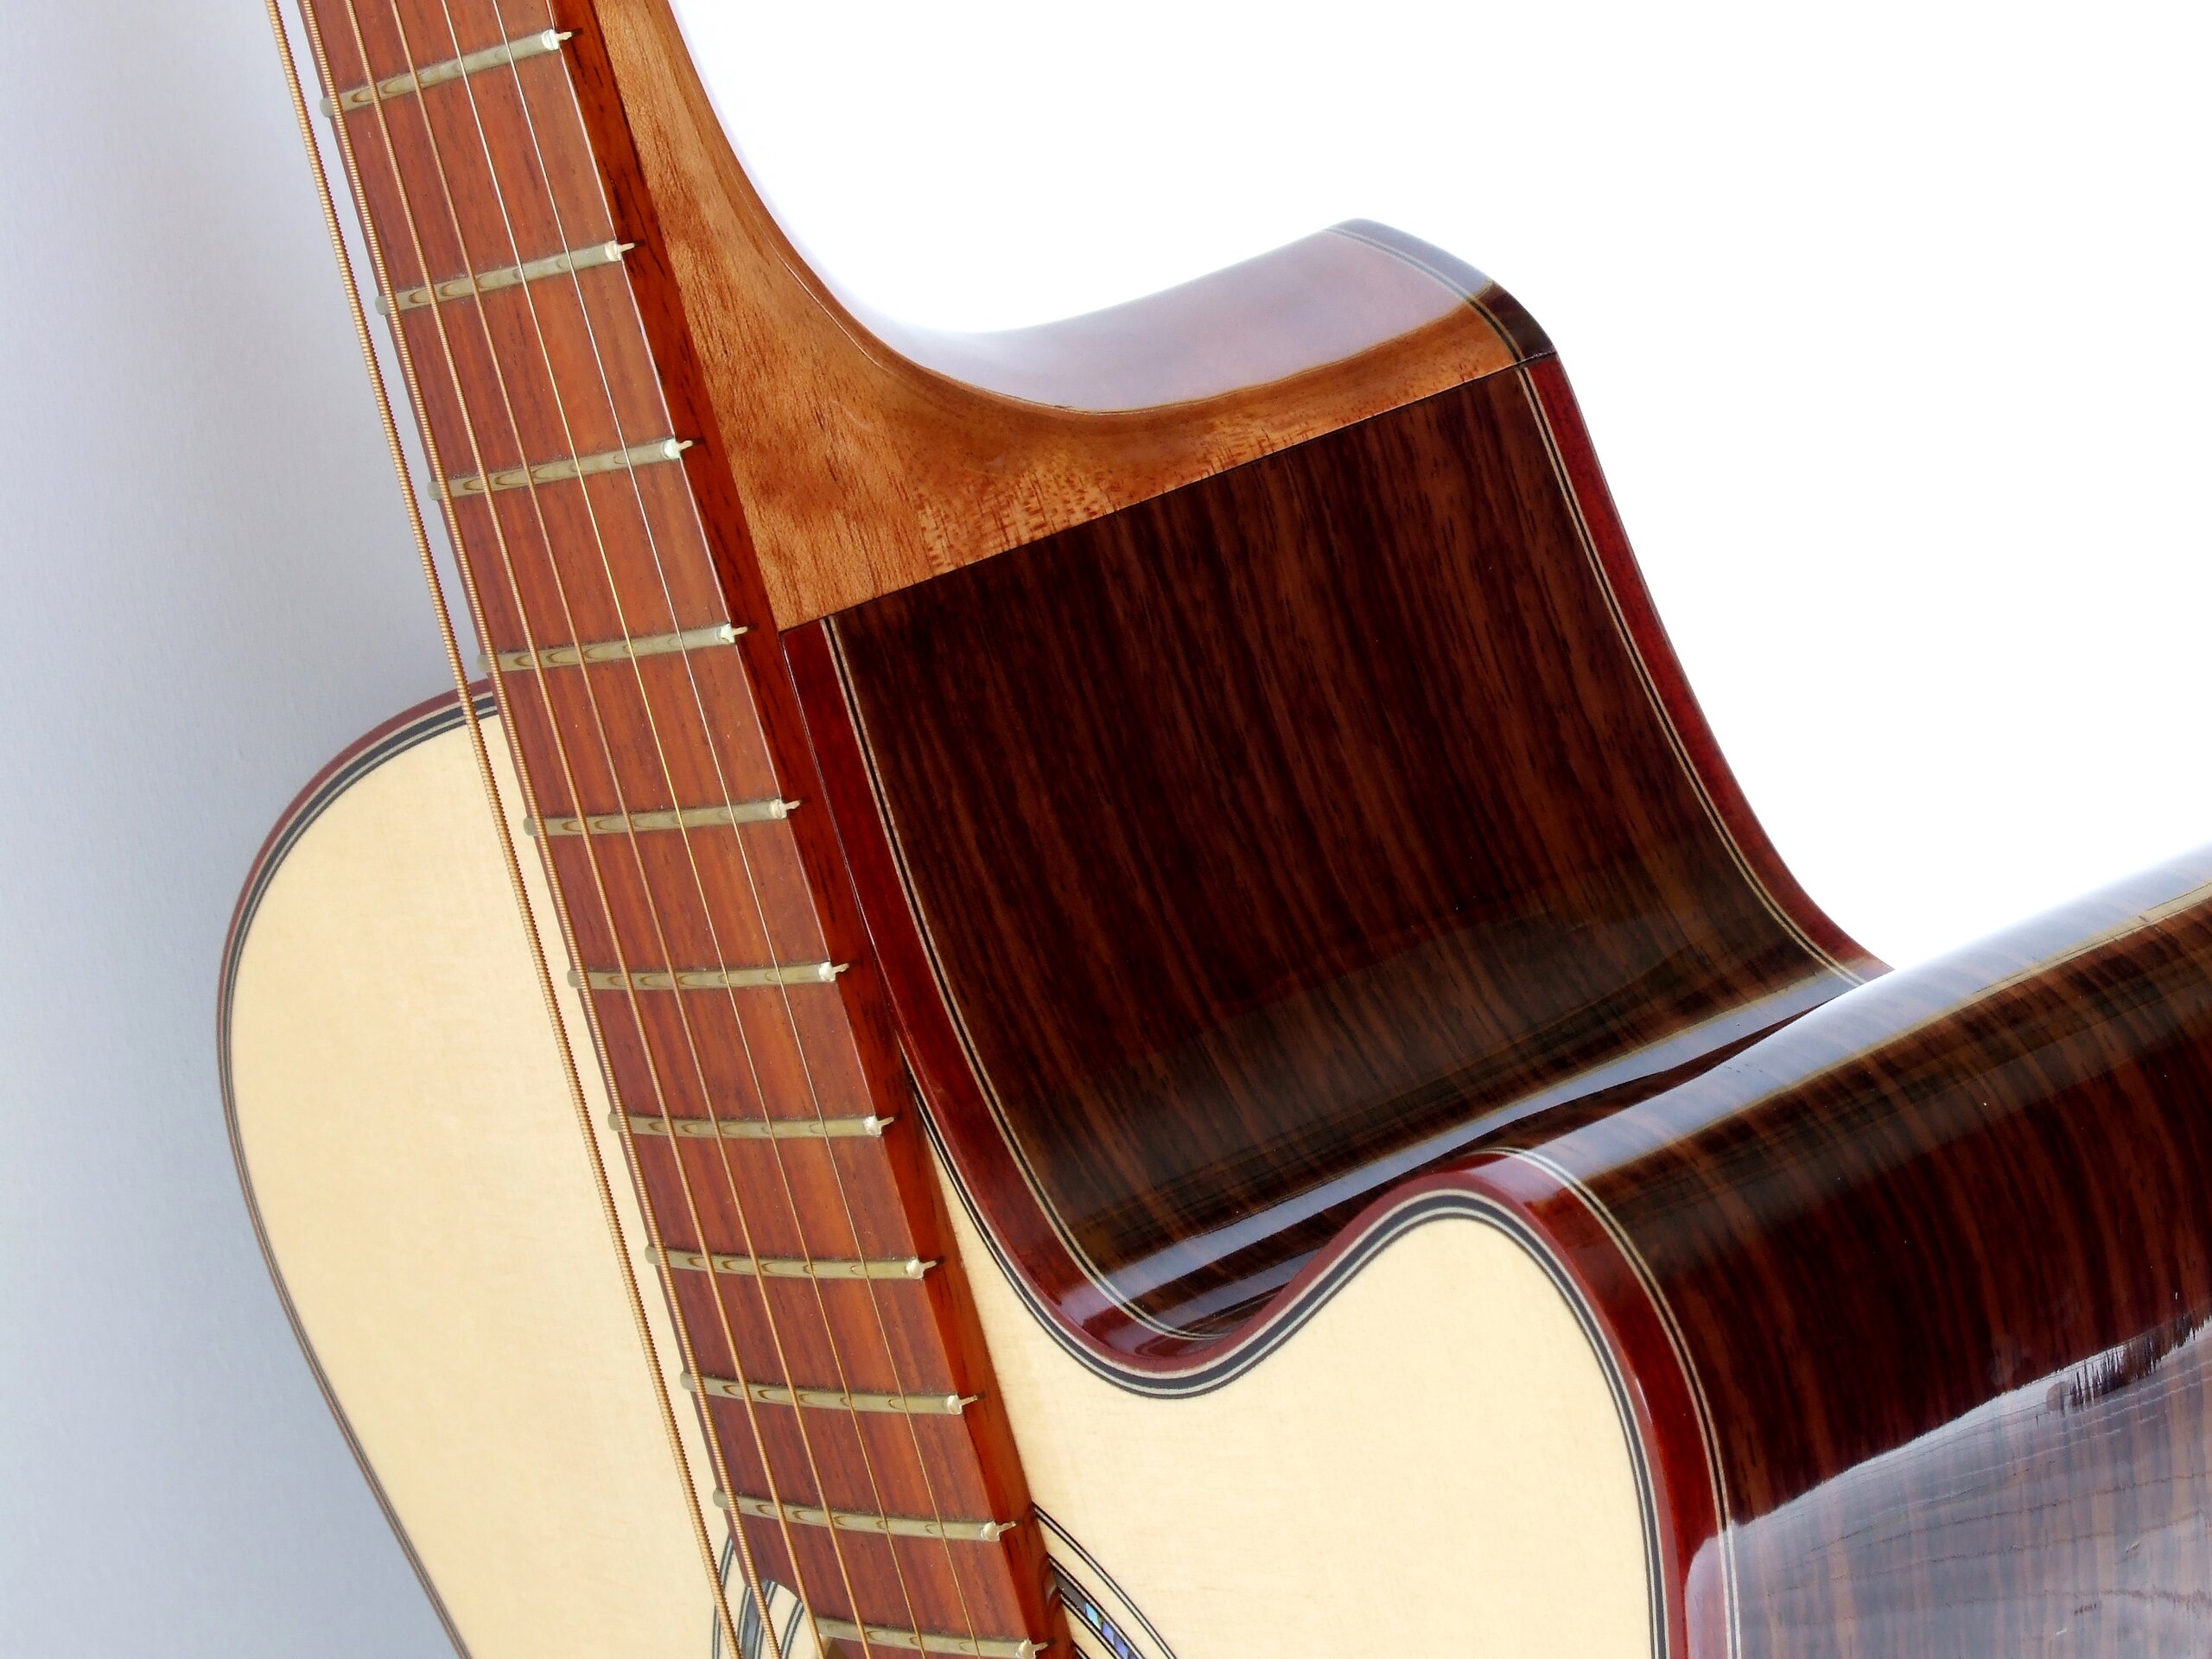 Bloodwood binding around the cutaway of a steel string guitar